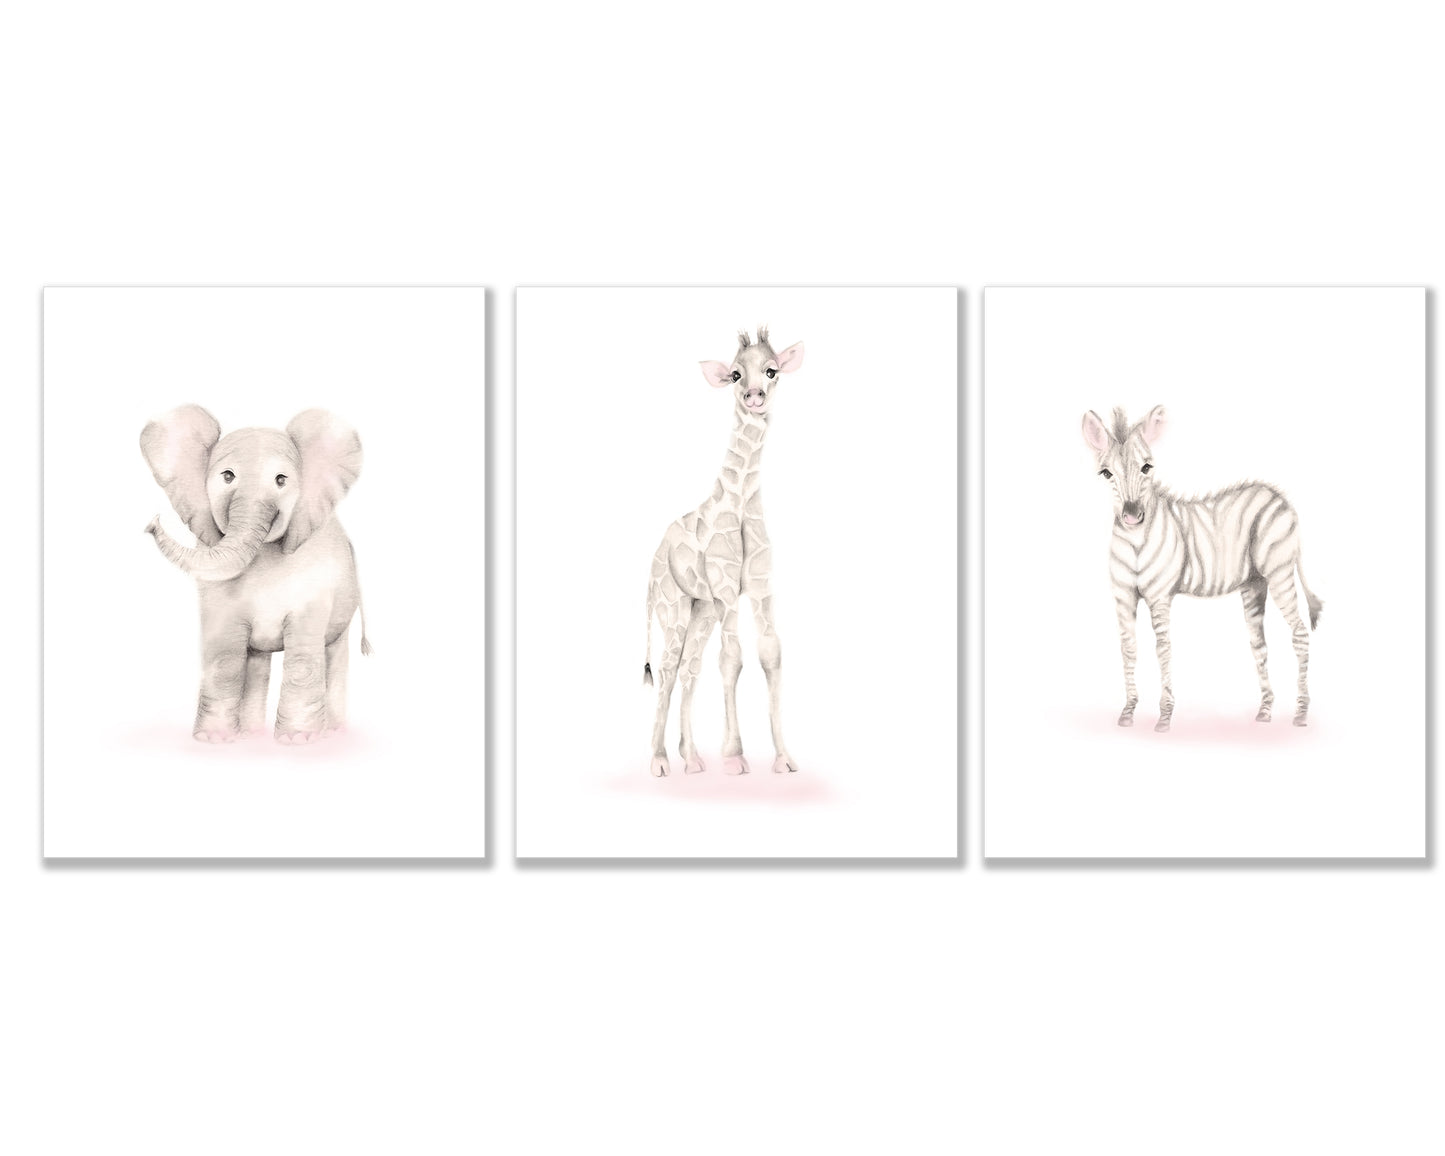 Set of 3 Safari animal pencil sketch prints in shades of beige and pink. The set includes a baby elephant, giraffe and zebra - Studio Q - Art by Nicky Quartermaine Scott